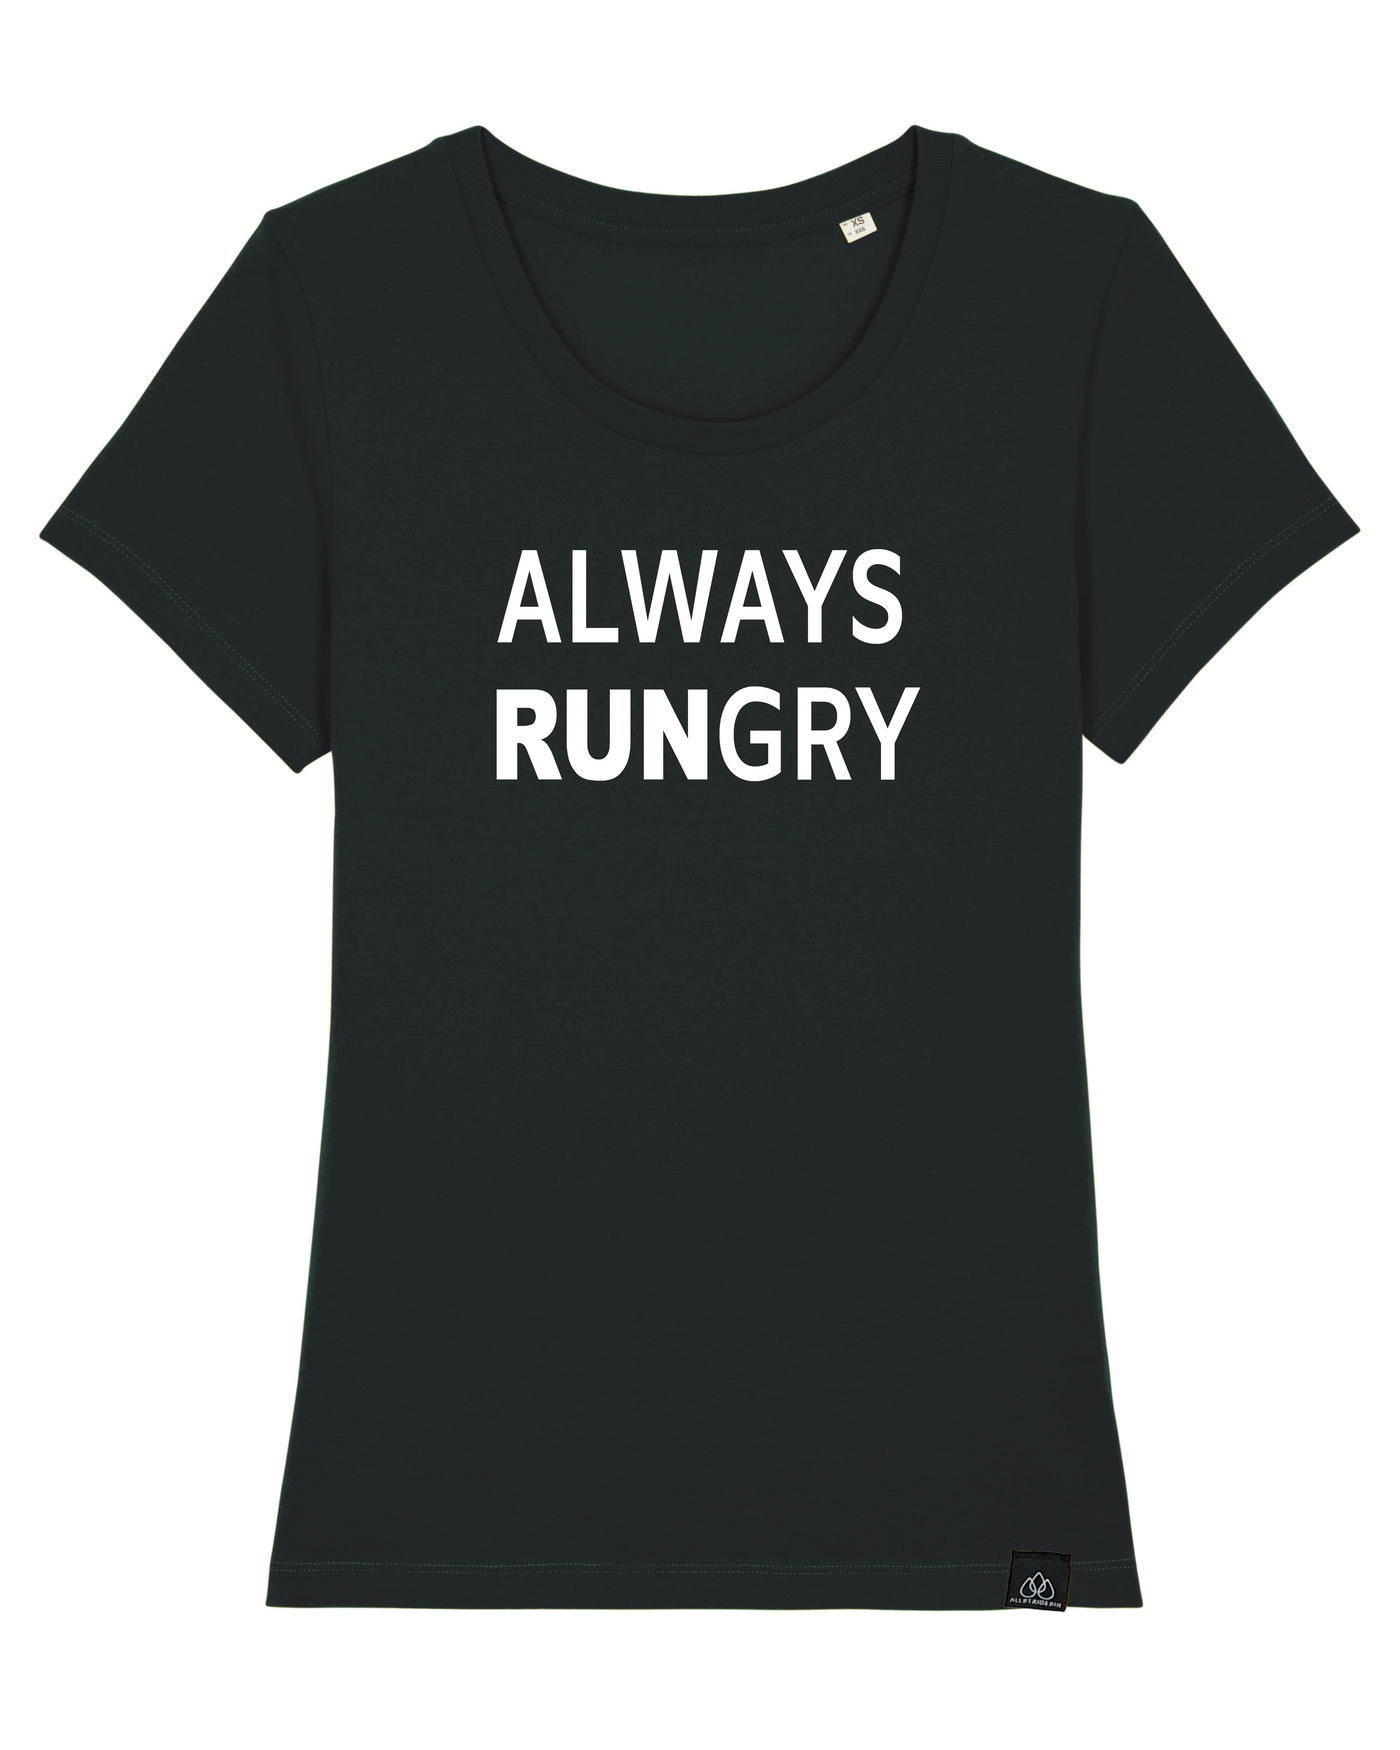 ALWAYS RUNGRY - ICONIC LADY T-SHIRT | ALLSTRIDESIN®